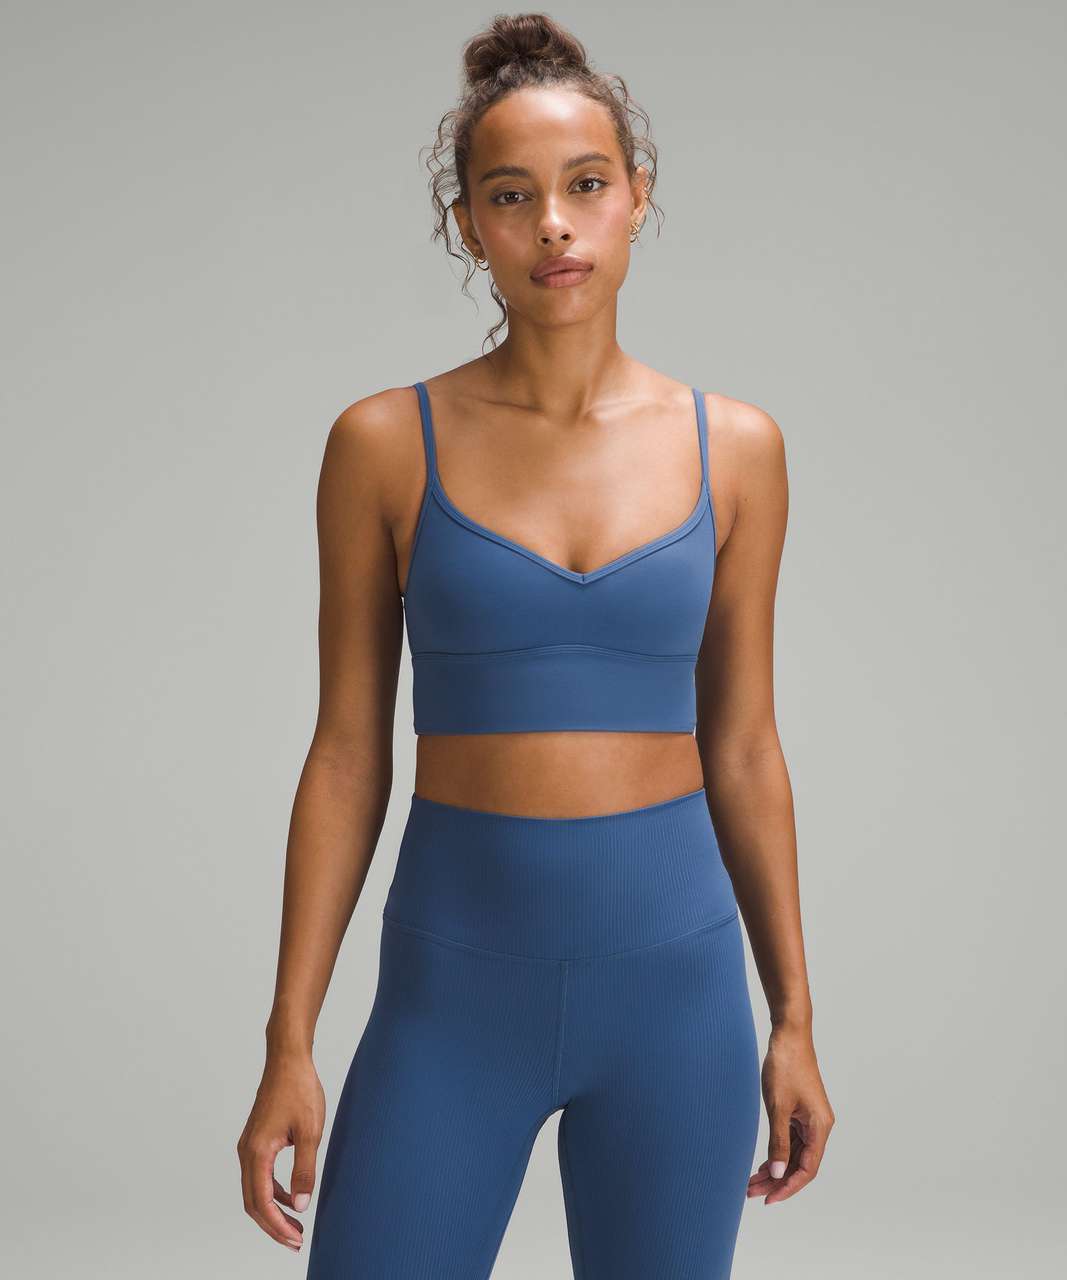 Lululemon Align Sweetheart Bra *Light Support, A/B Cup - Pitch